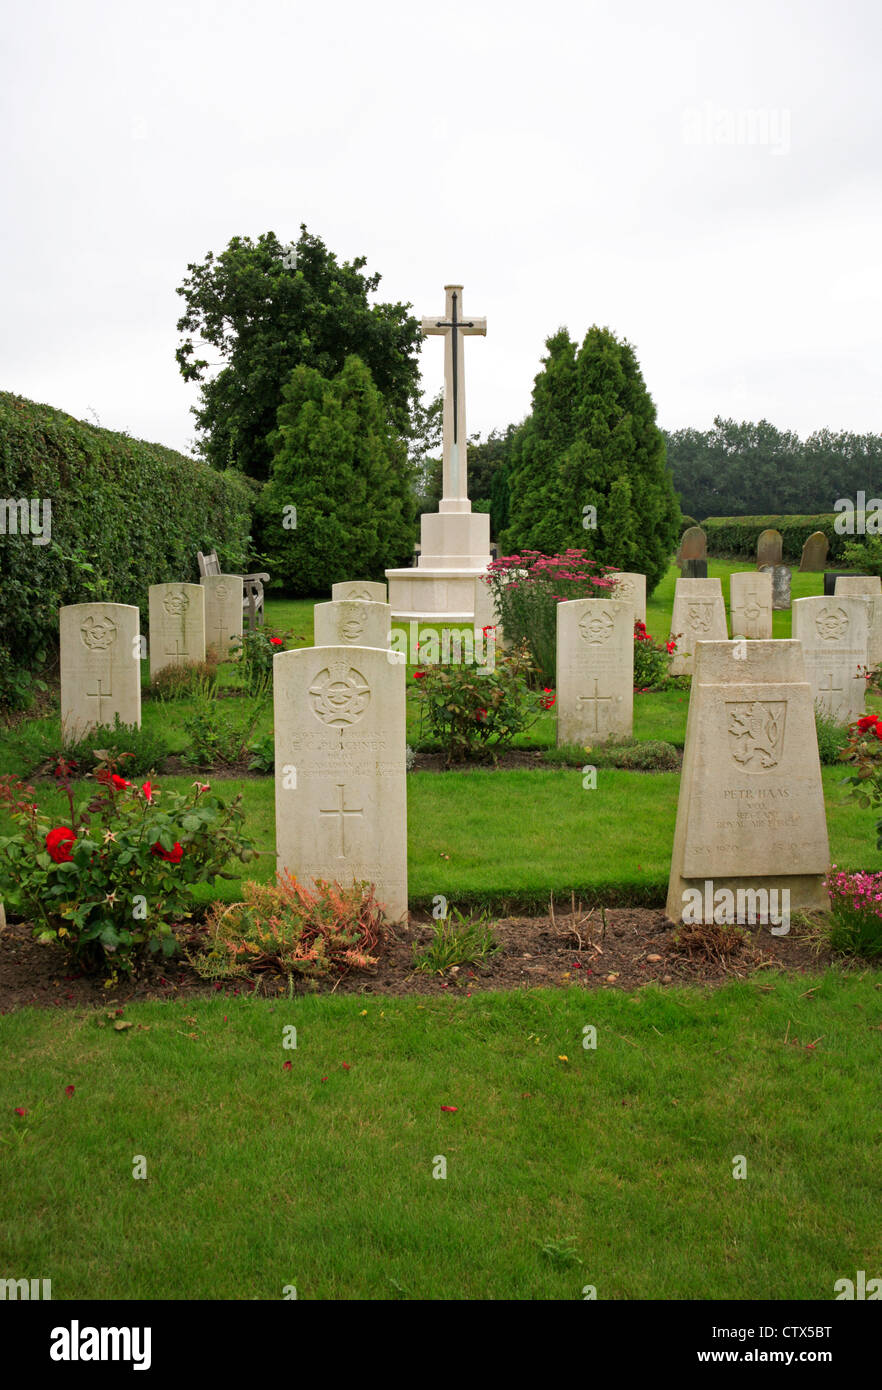 A view of the war graves plot and memorial cross for service personnel at Scottow Cemetery, Norfolk, England, United Kingdom. Stock Photo